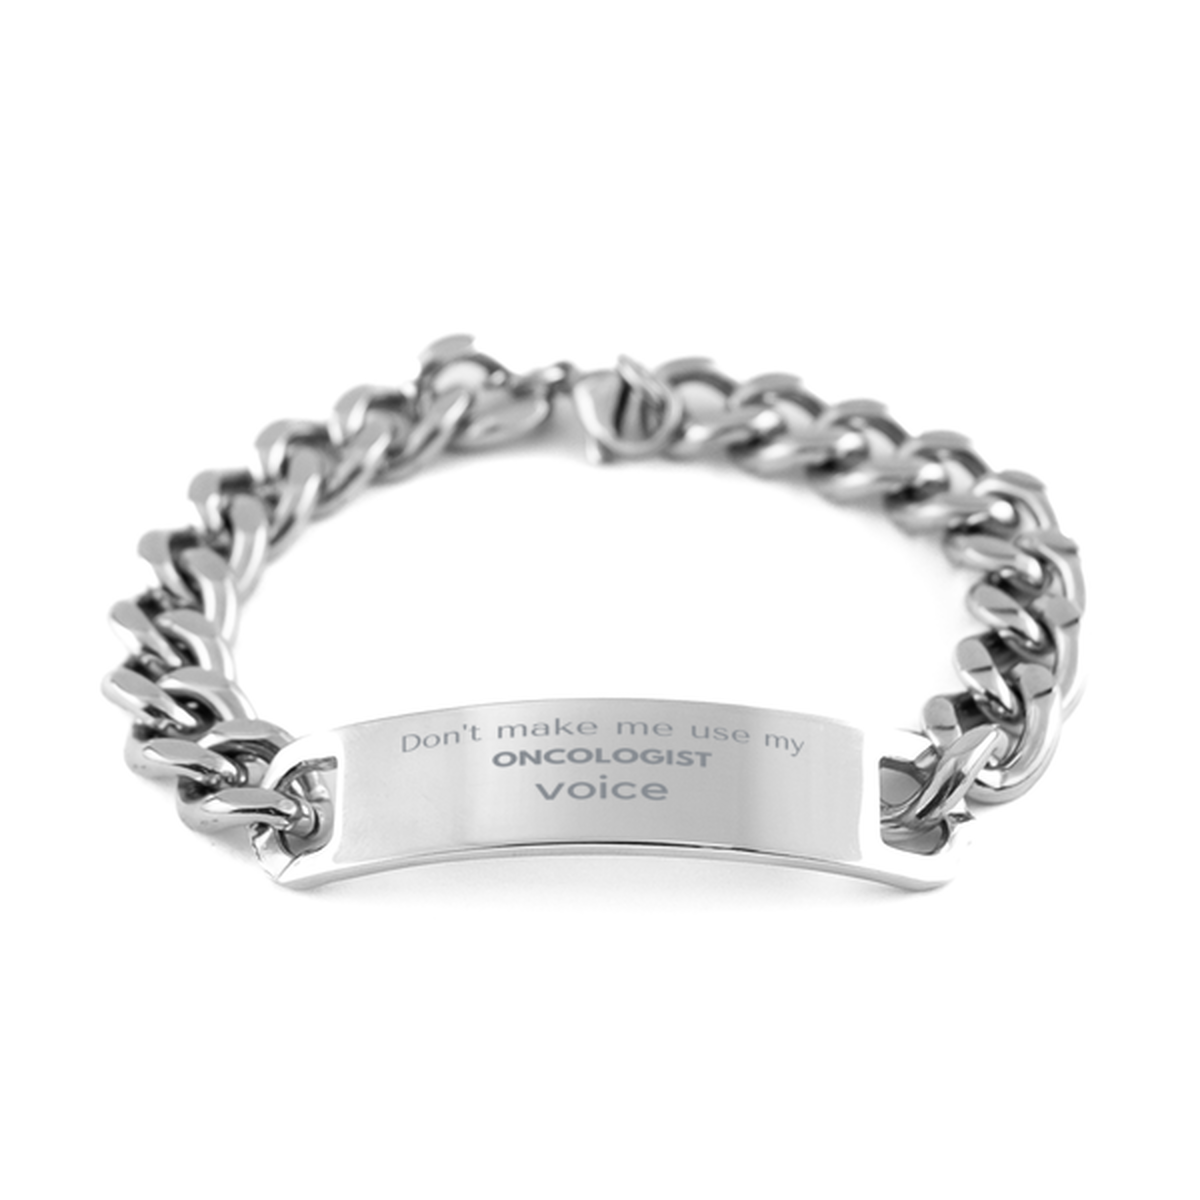 Don't make me use my Oncologist voice, Sarcasm Oncologist Gifts, Christmas Oncologist Cuban Chain Stainless Steel Bracelet Birthday Unique Gifts For Oncologist Coworkers, Men, Women, Colleague, Friends